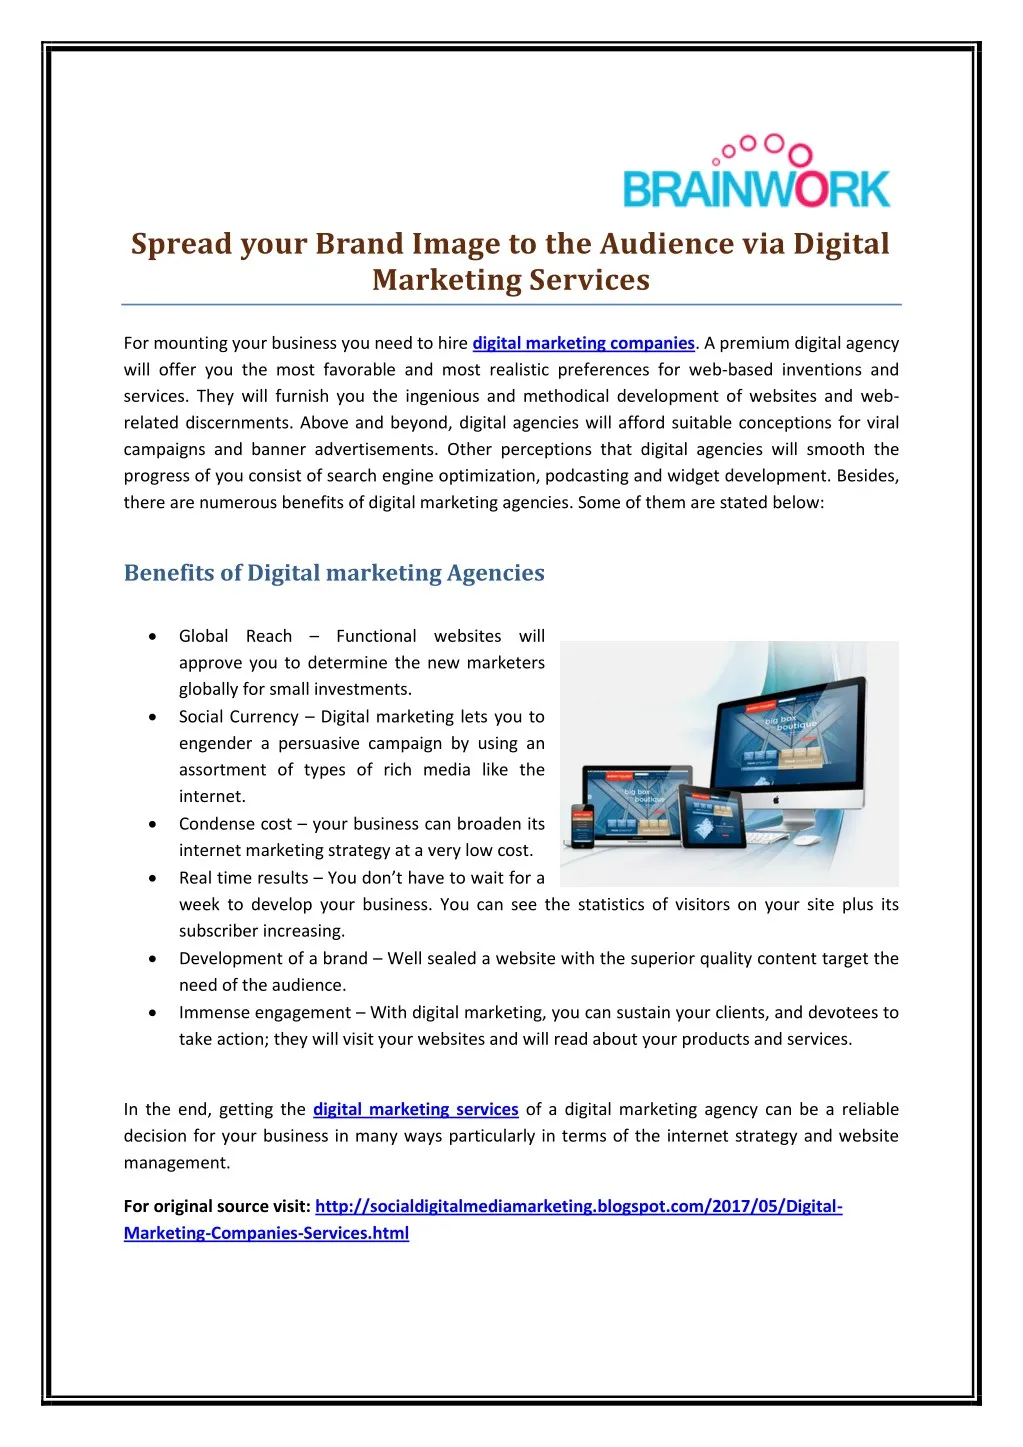 spread your brand image to the audience